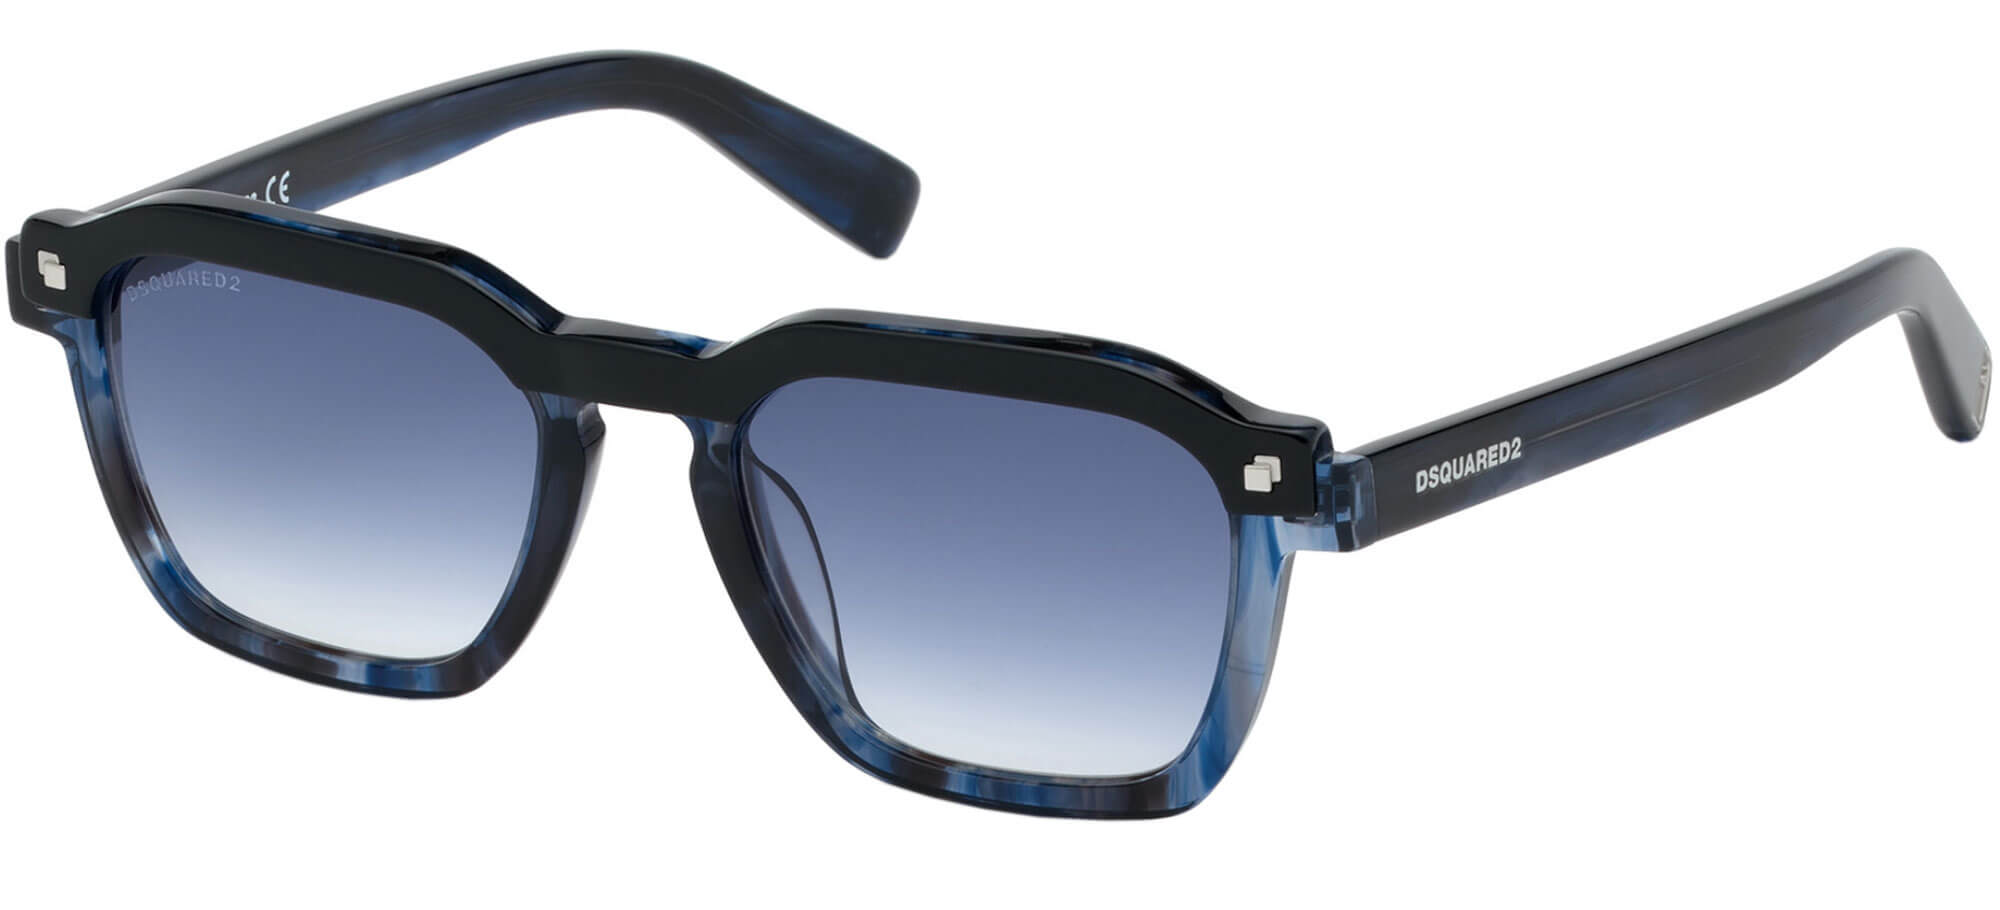 Dsquared2CLAY DQ 0303Blue Havana/blue Shaded (92W G)